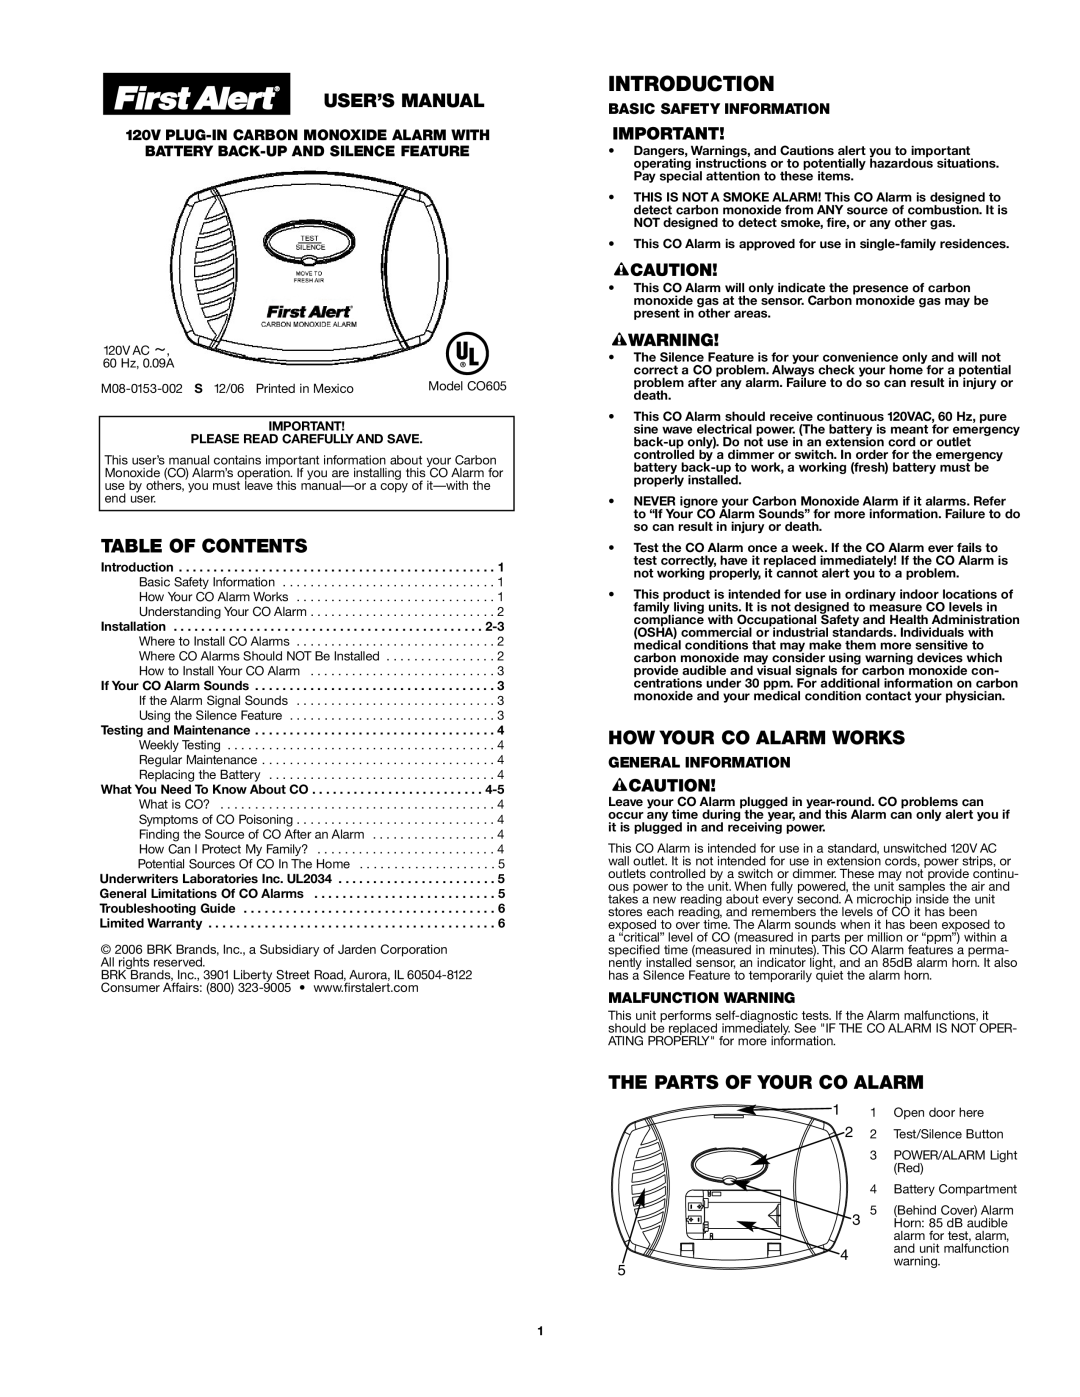 First Alert CO605 user manual Introduction, Table Of Contents, How Your Co Alarm Works, The Parts Of Your Co Alarm 